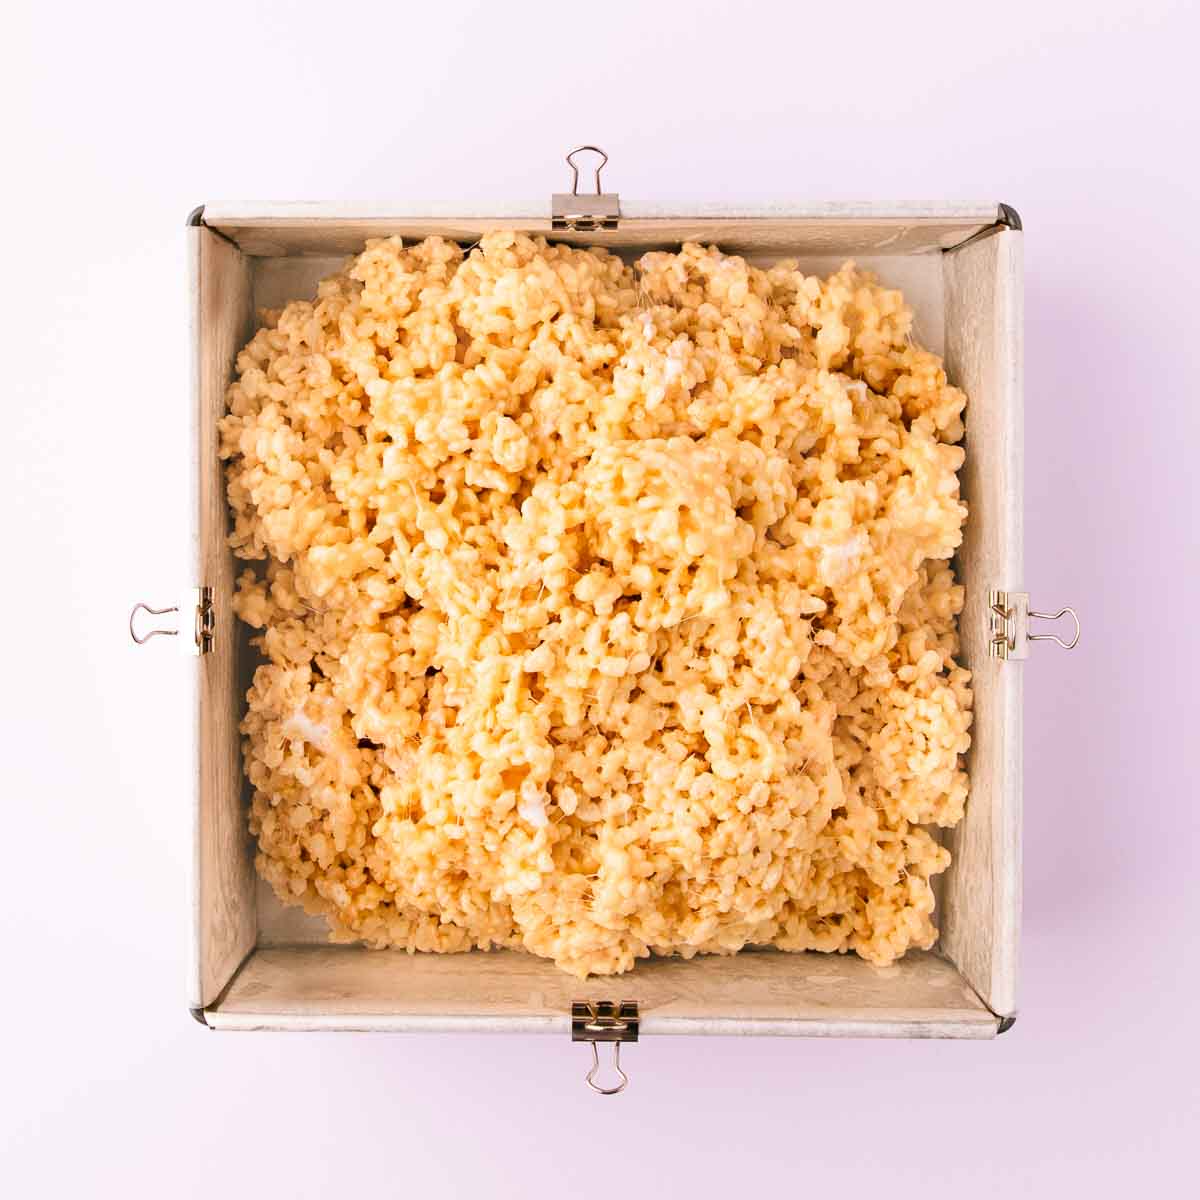 The rice krispie mixture piled into a baking paper lined square cake pan.